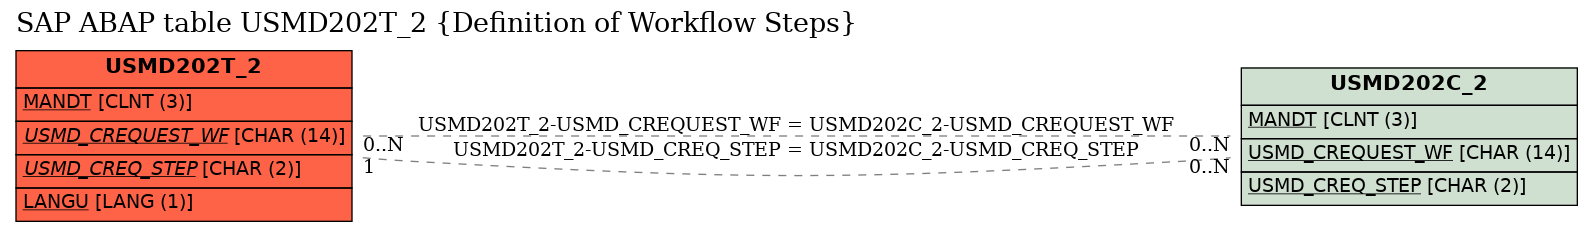 E-R Diagram for table USMD202T_2 (Definition of Workflow Steps)